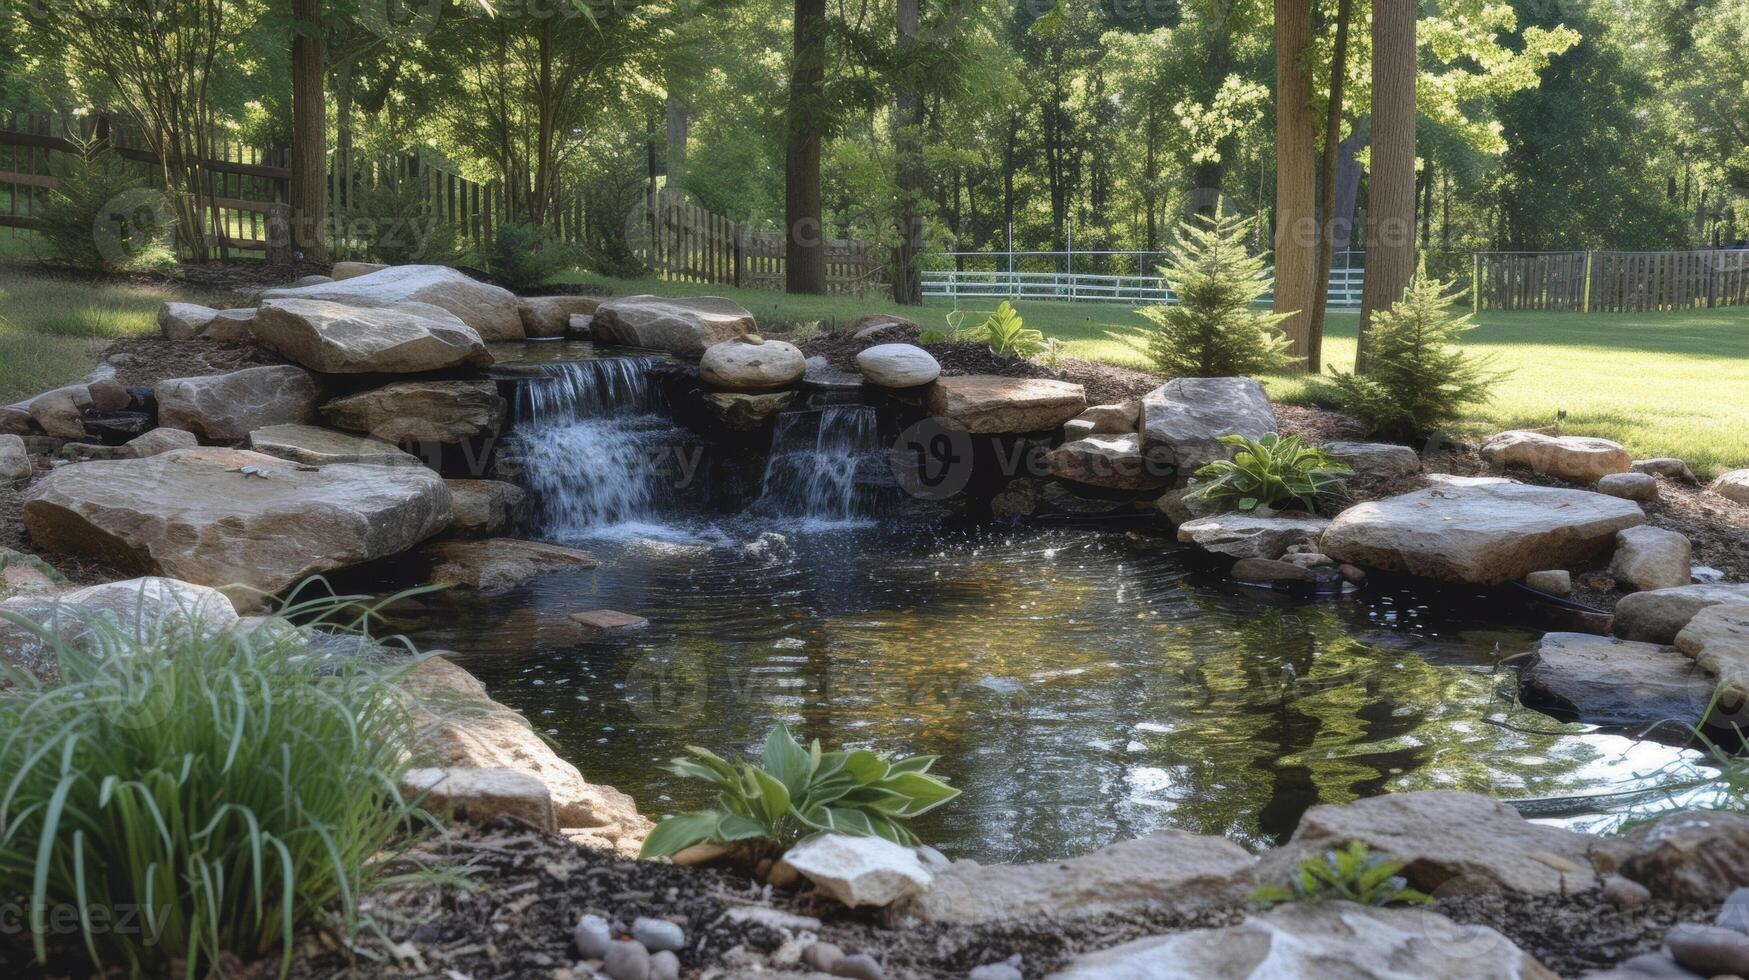 A backyard pond with natural rock formations and a small waterfall making it appear as if it has always been a part of the landscape photo